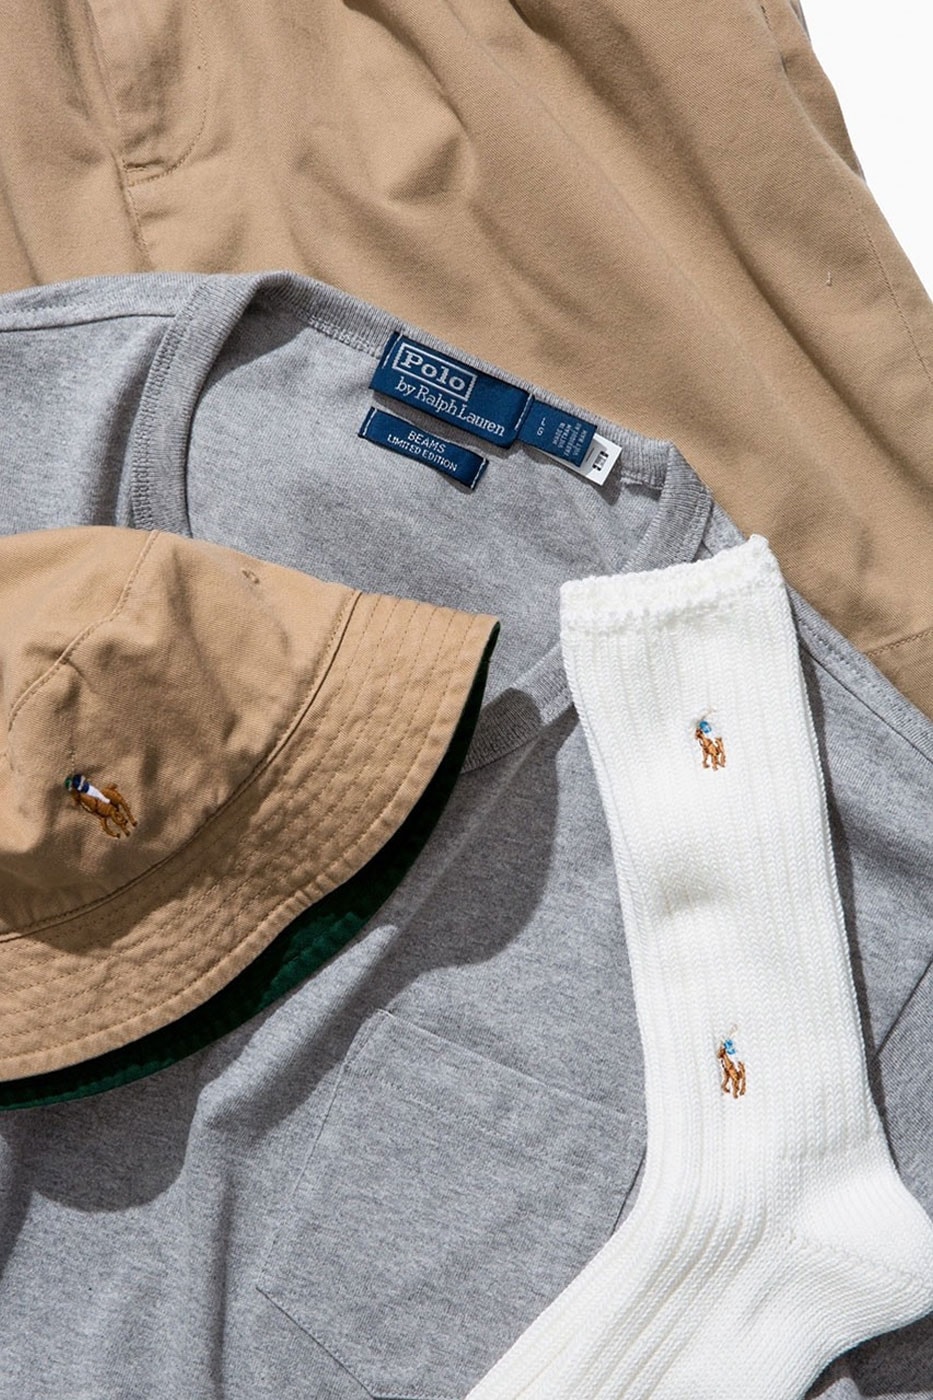 BEAMS Releases Its Eighth Capsule Collection With Polo Ralph Lauren